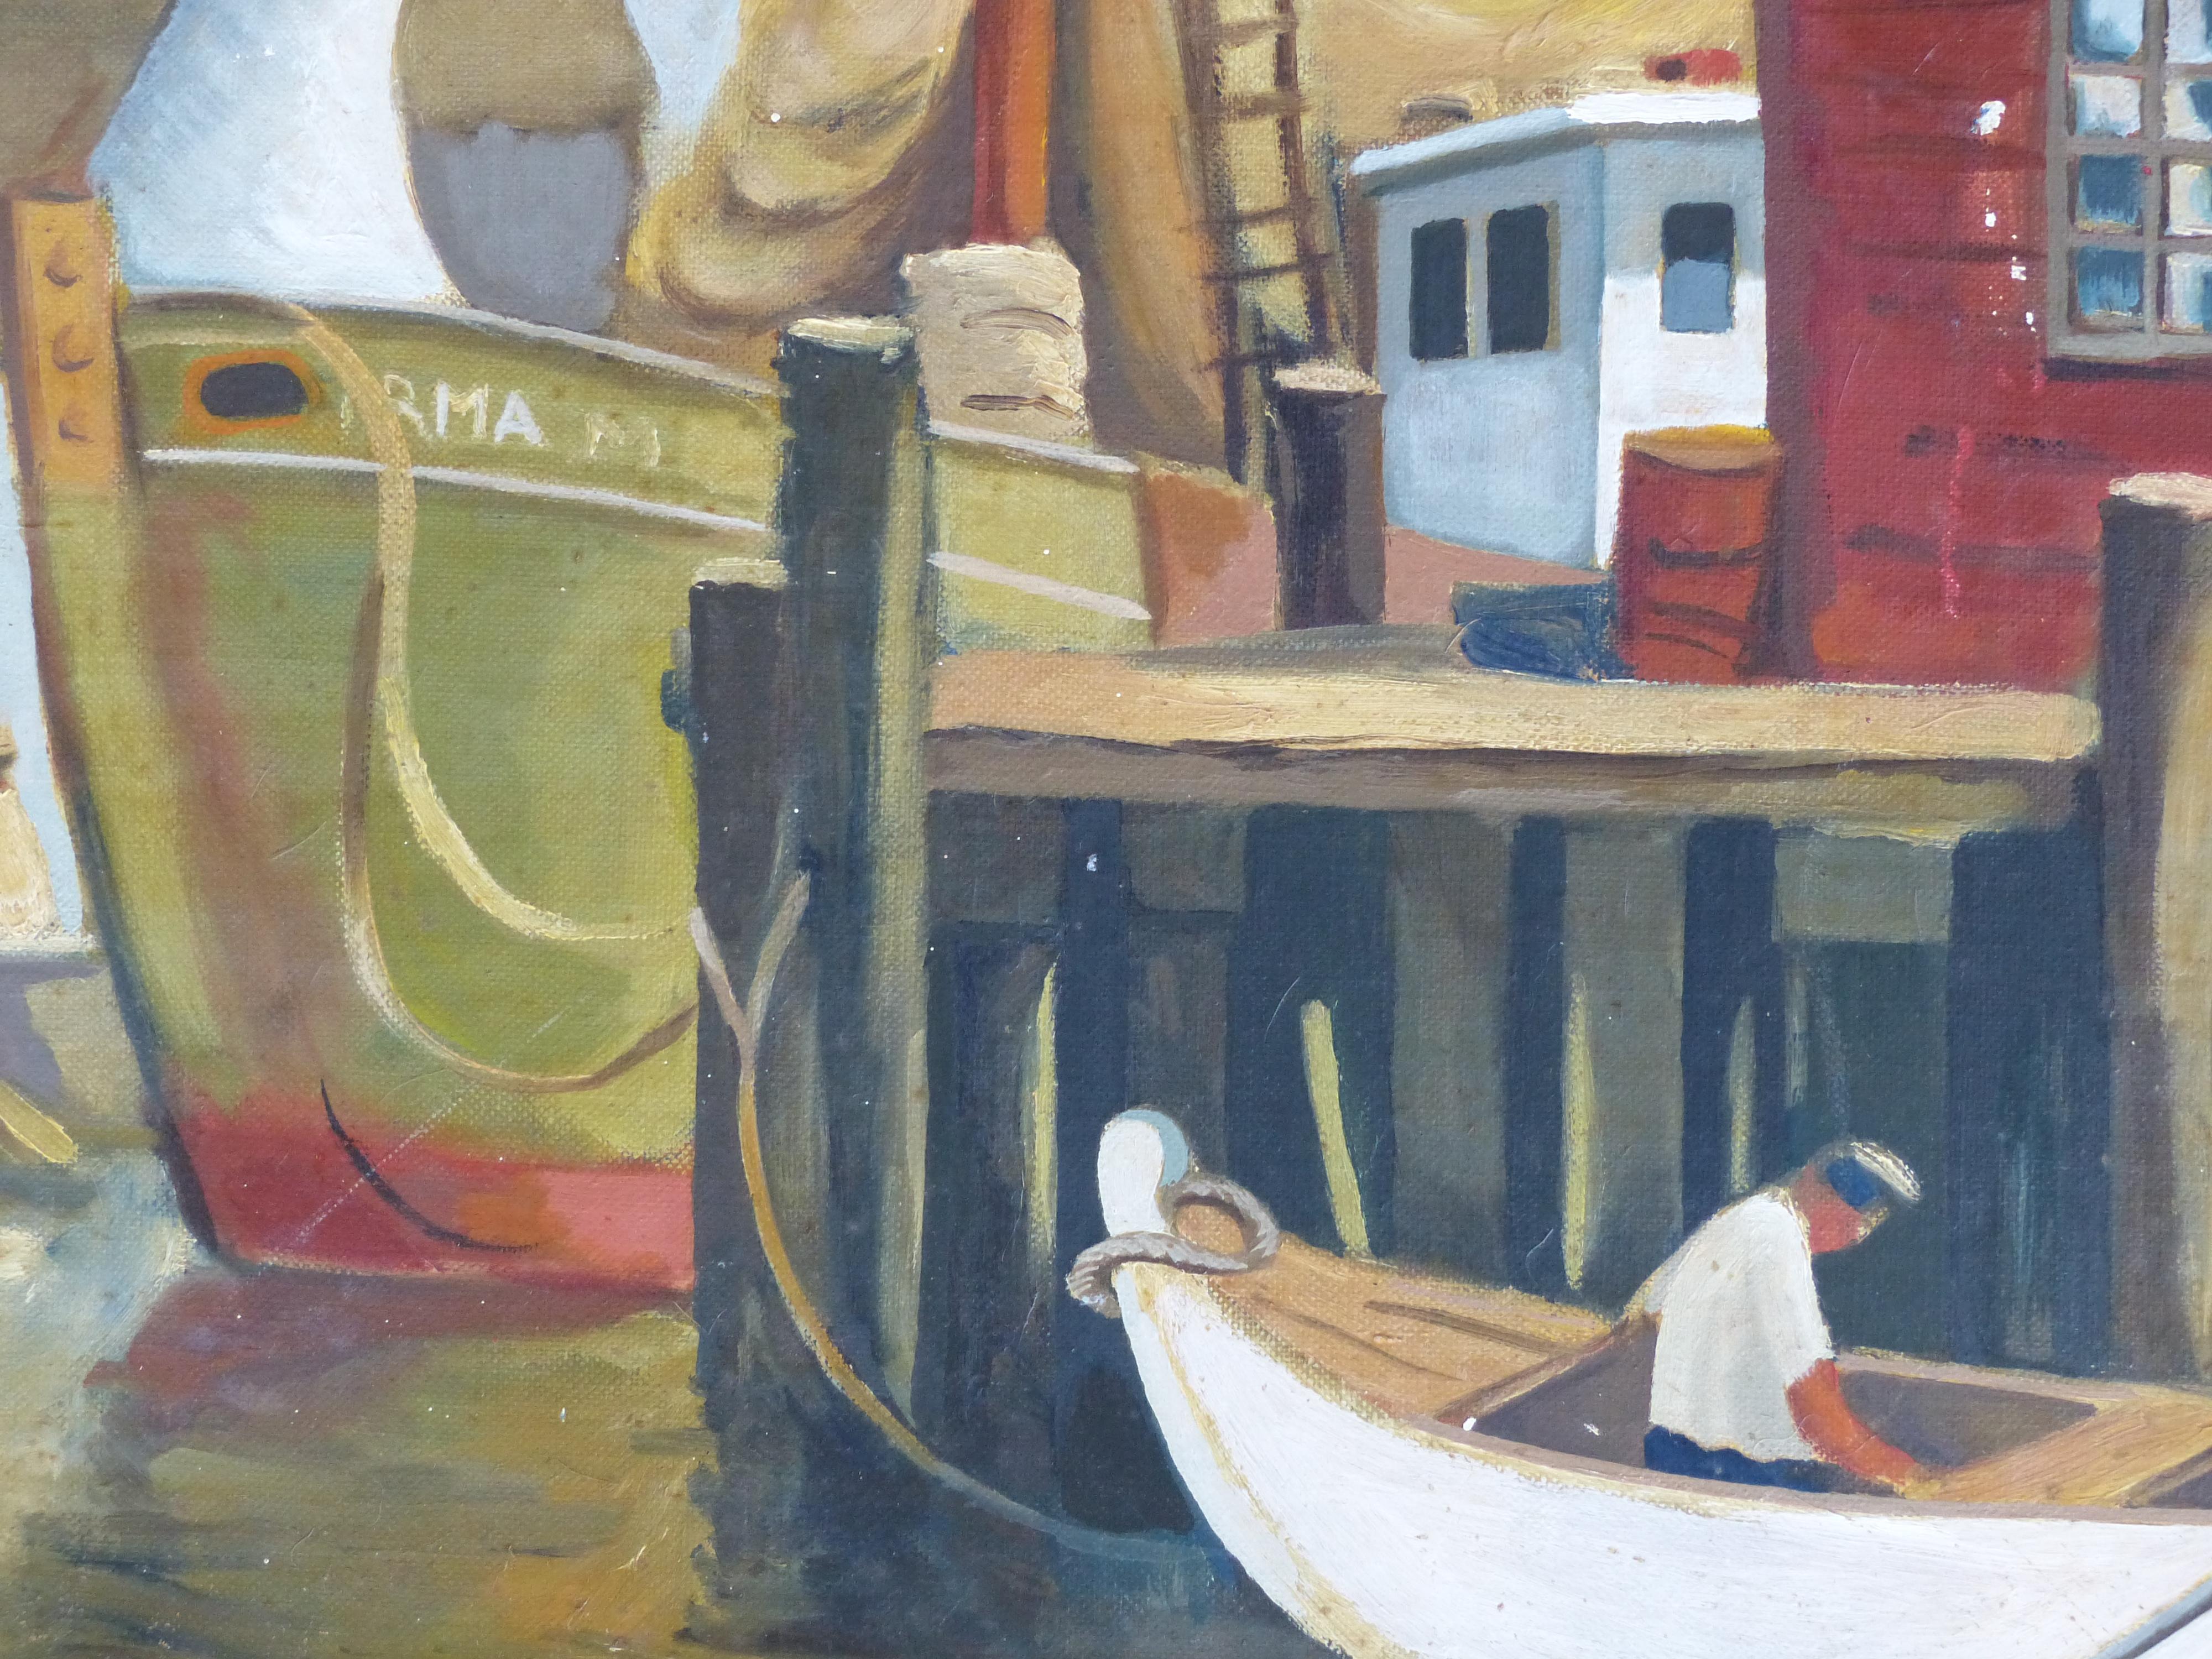 1930s WPA American School Shipyard Oil Painting

Offered for sale is a 1930s WPA American School oil painting of a shipyard with fishing boats. The work is oil paint on a Masonite panel and is newly framed in cerused oak with a bevelled linen